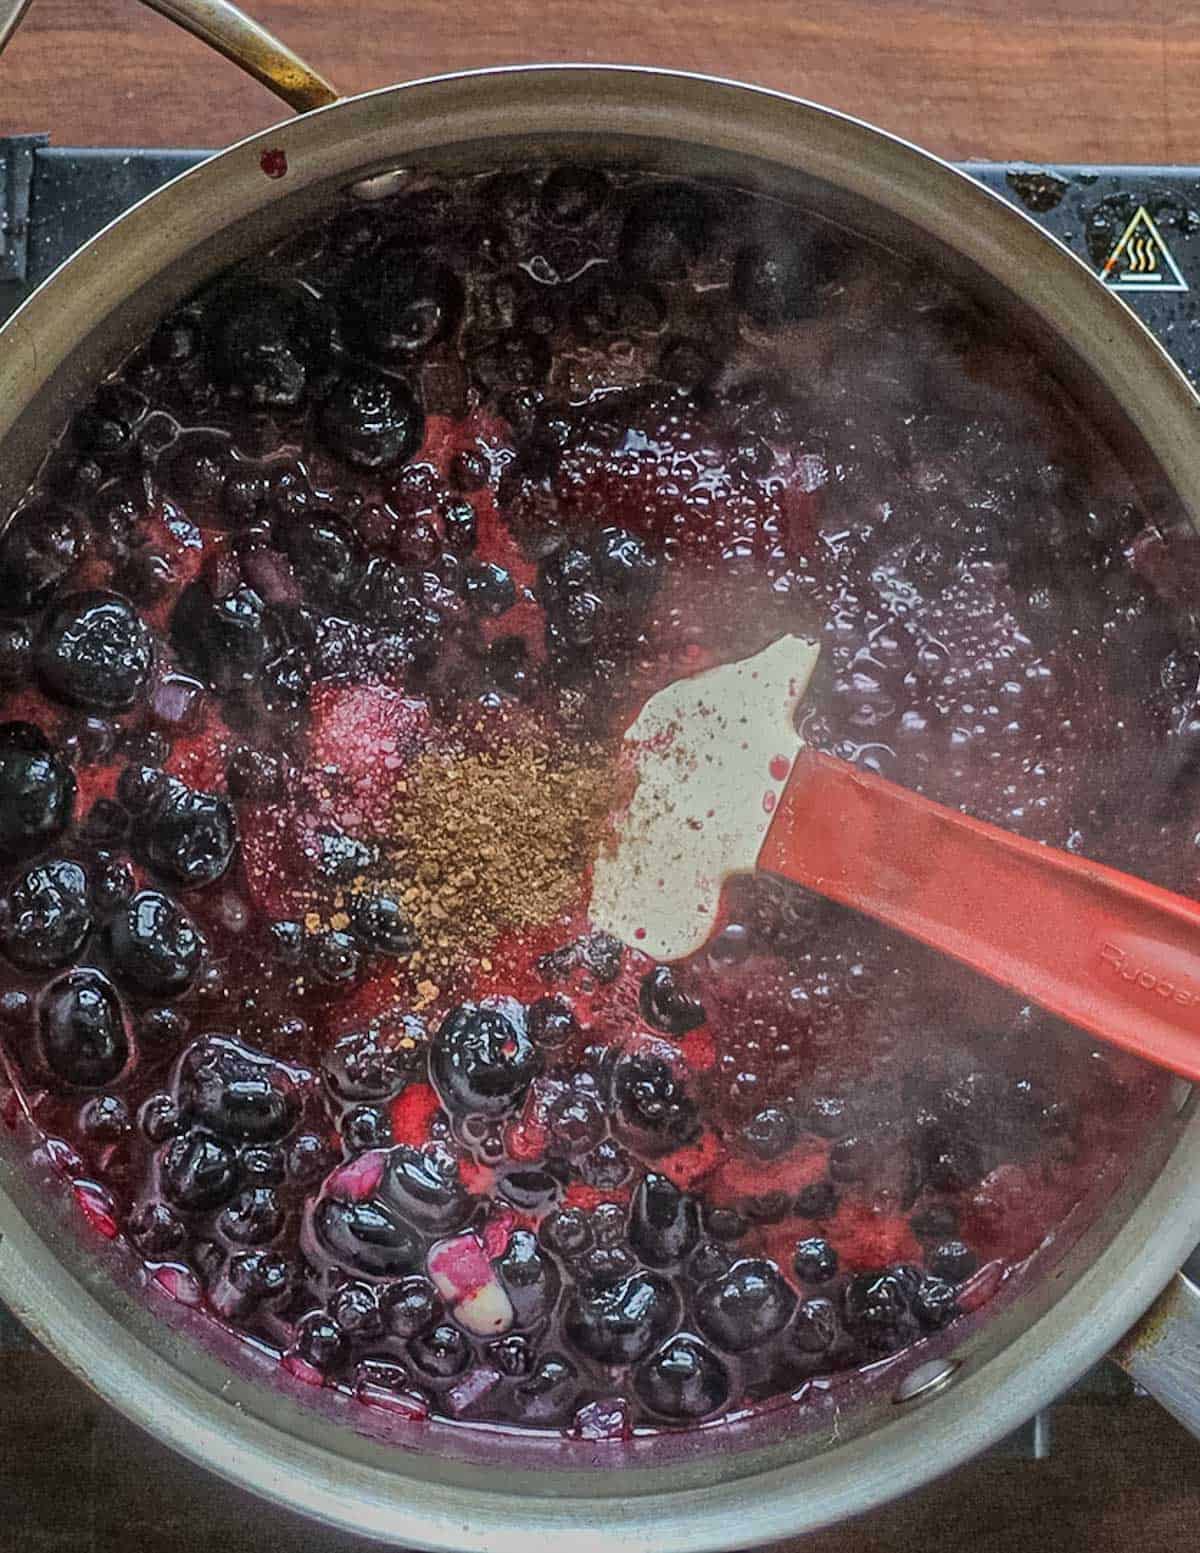 A pan of wild blueberry sauce cooking and steaming.